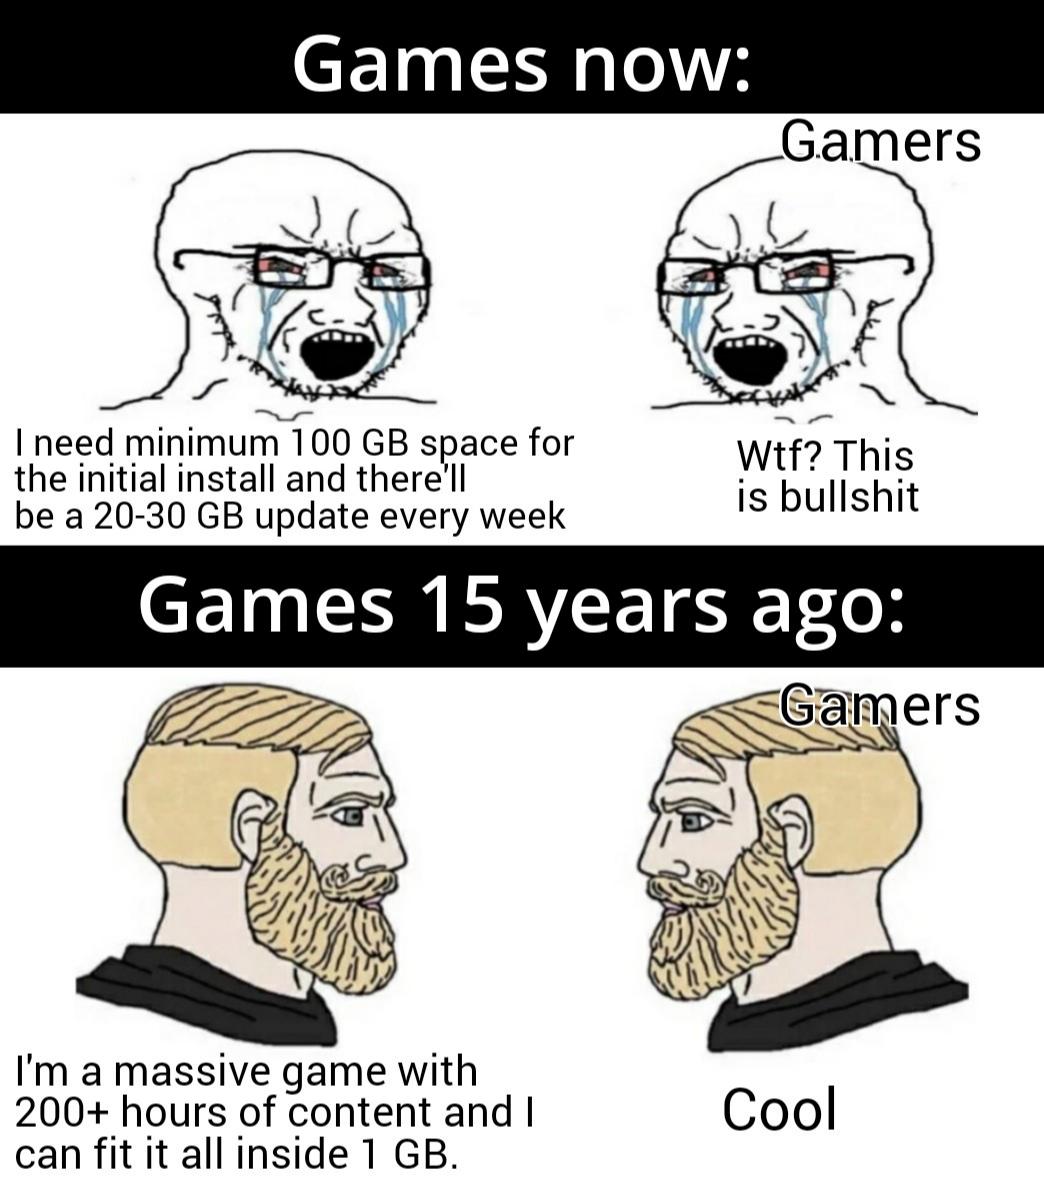 chad i know meme - Games now Gamers I need minimum 100 Gb space for the initial install and there'll be a 2030 Gb update every week Wtf? This is bullshit Games 15 years ago Gamers I'm a massive game with 200 hours of content and I can fit it all inside 1 